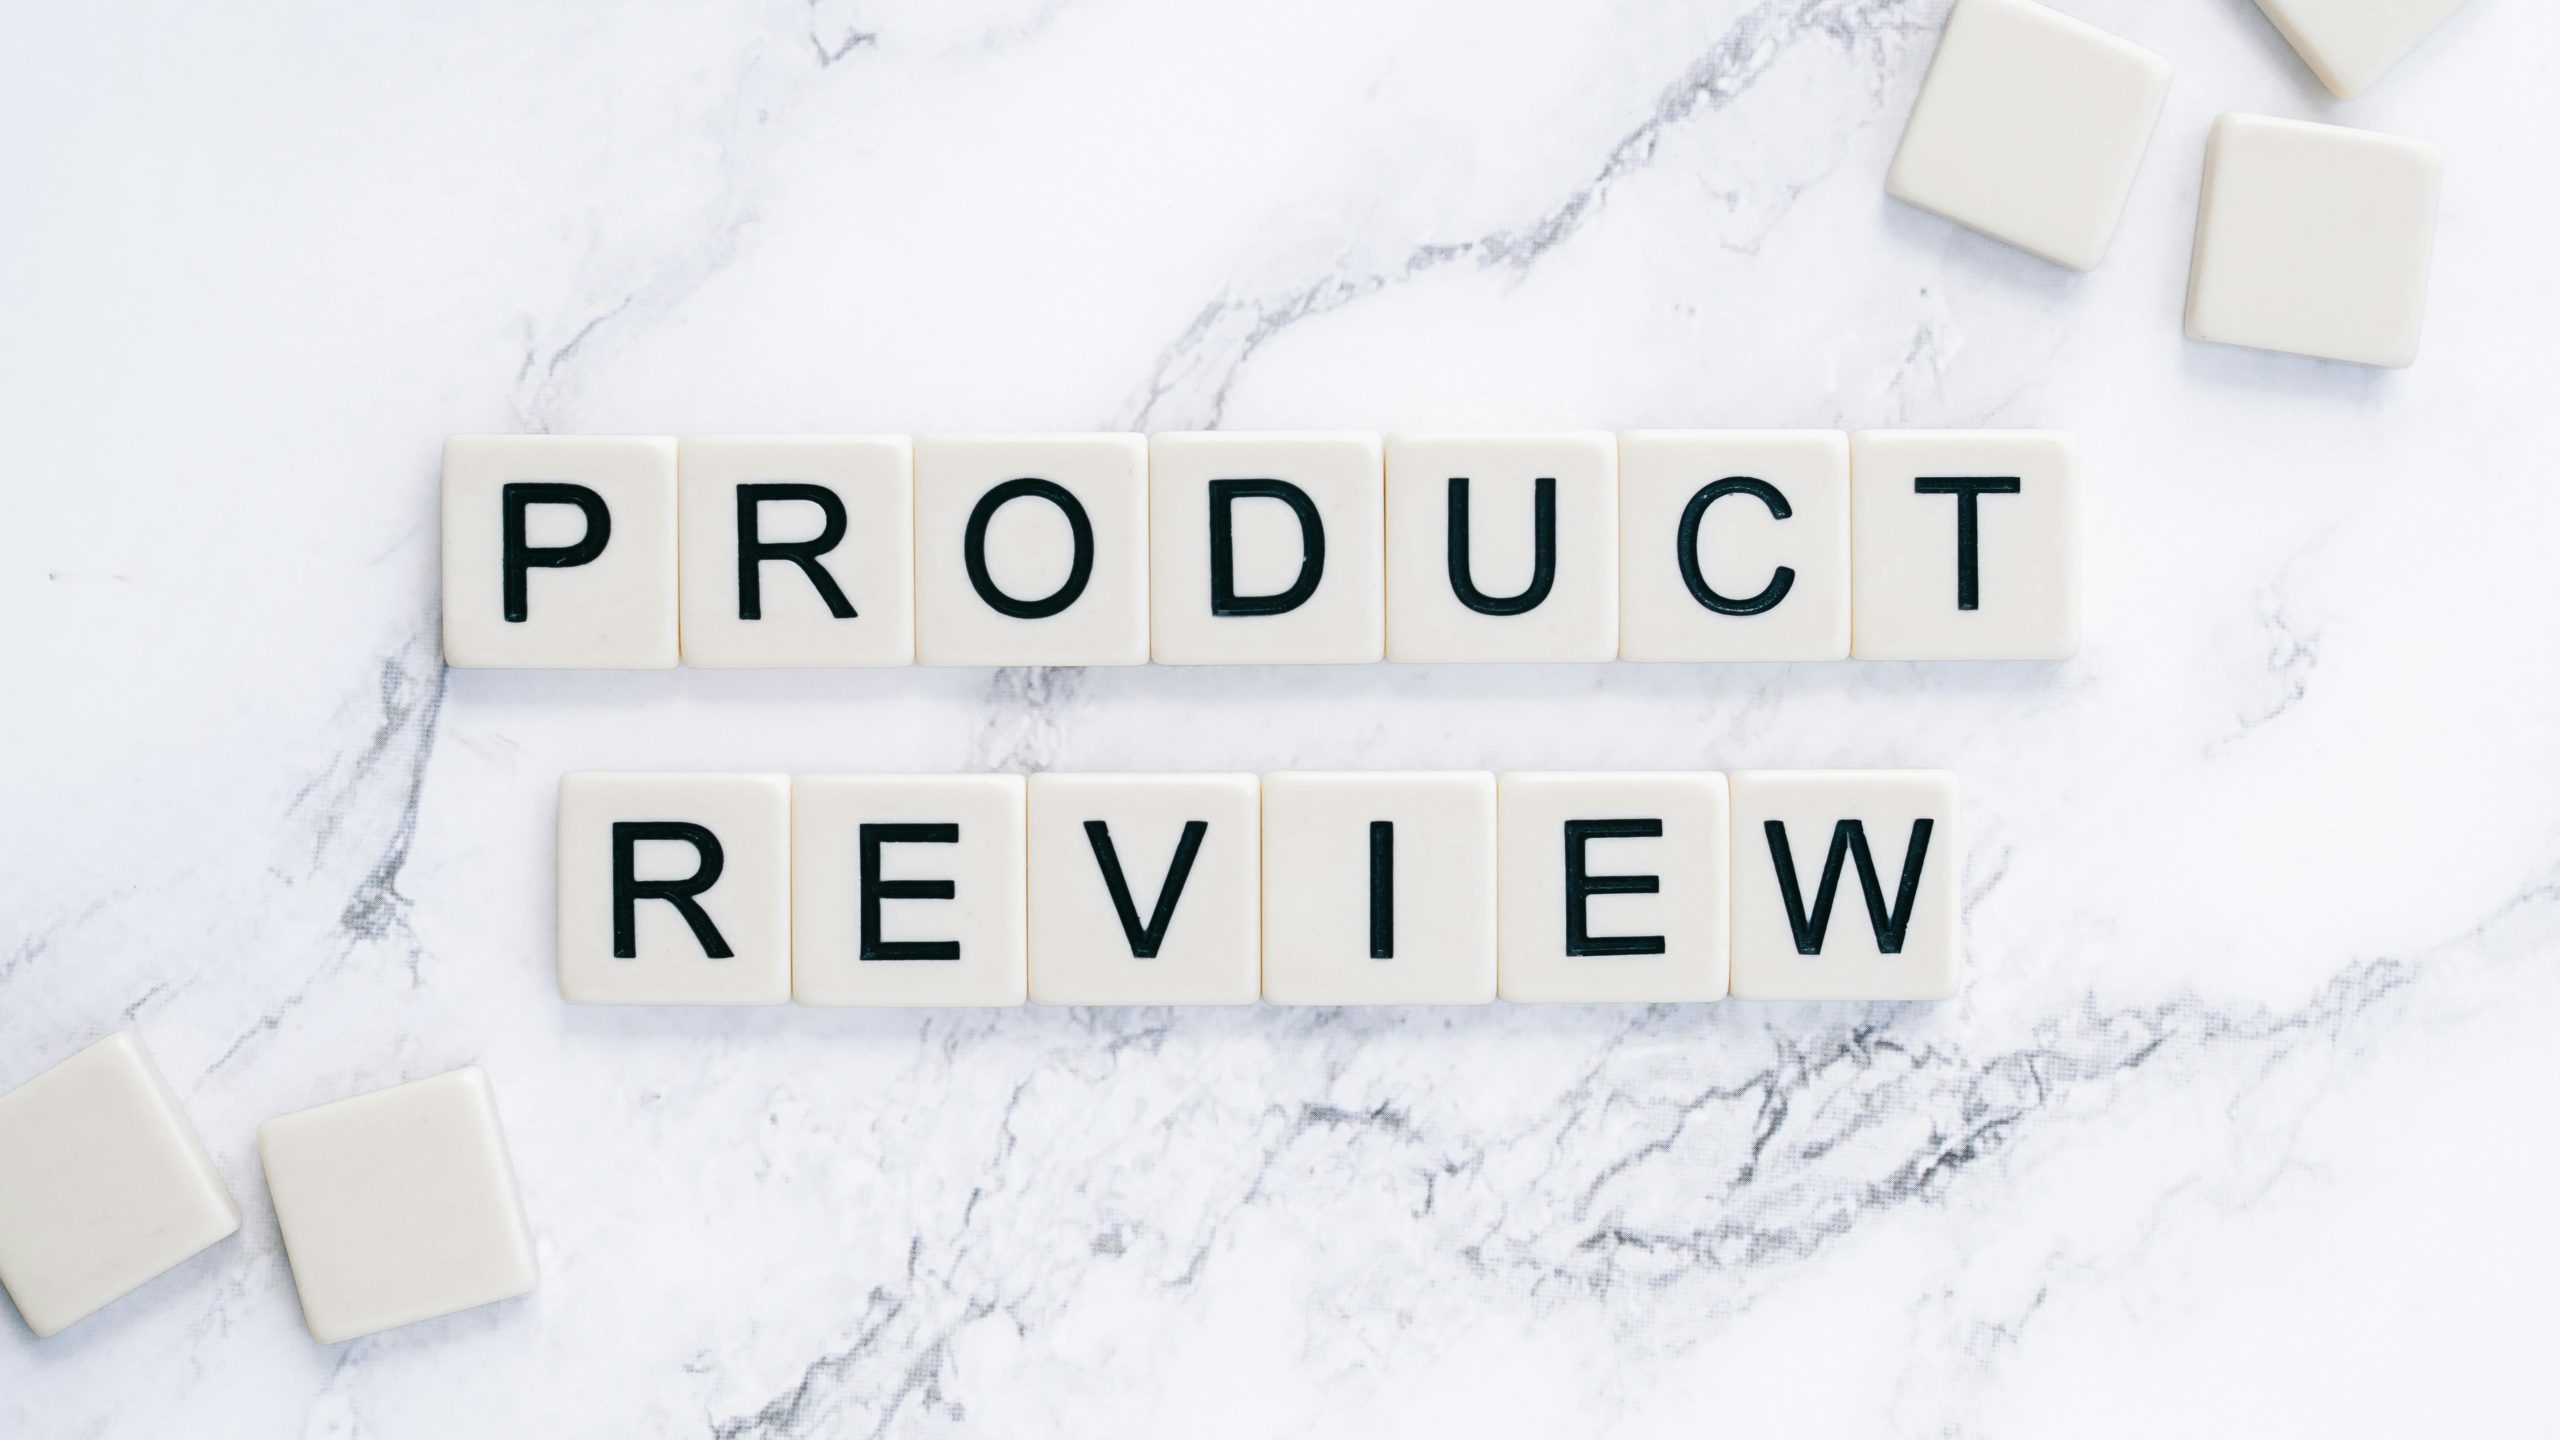 Speaking chủ đề Shopping: Product reviews